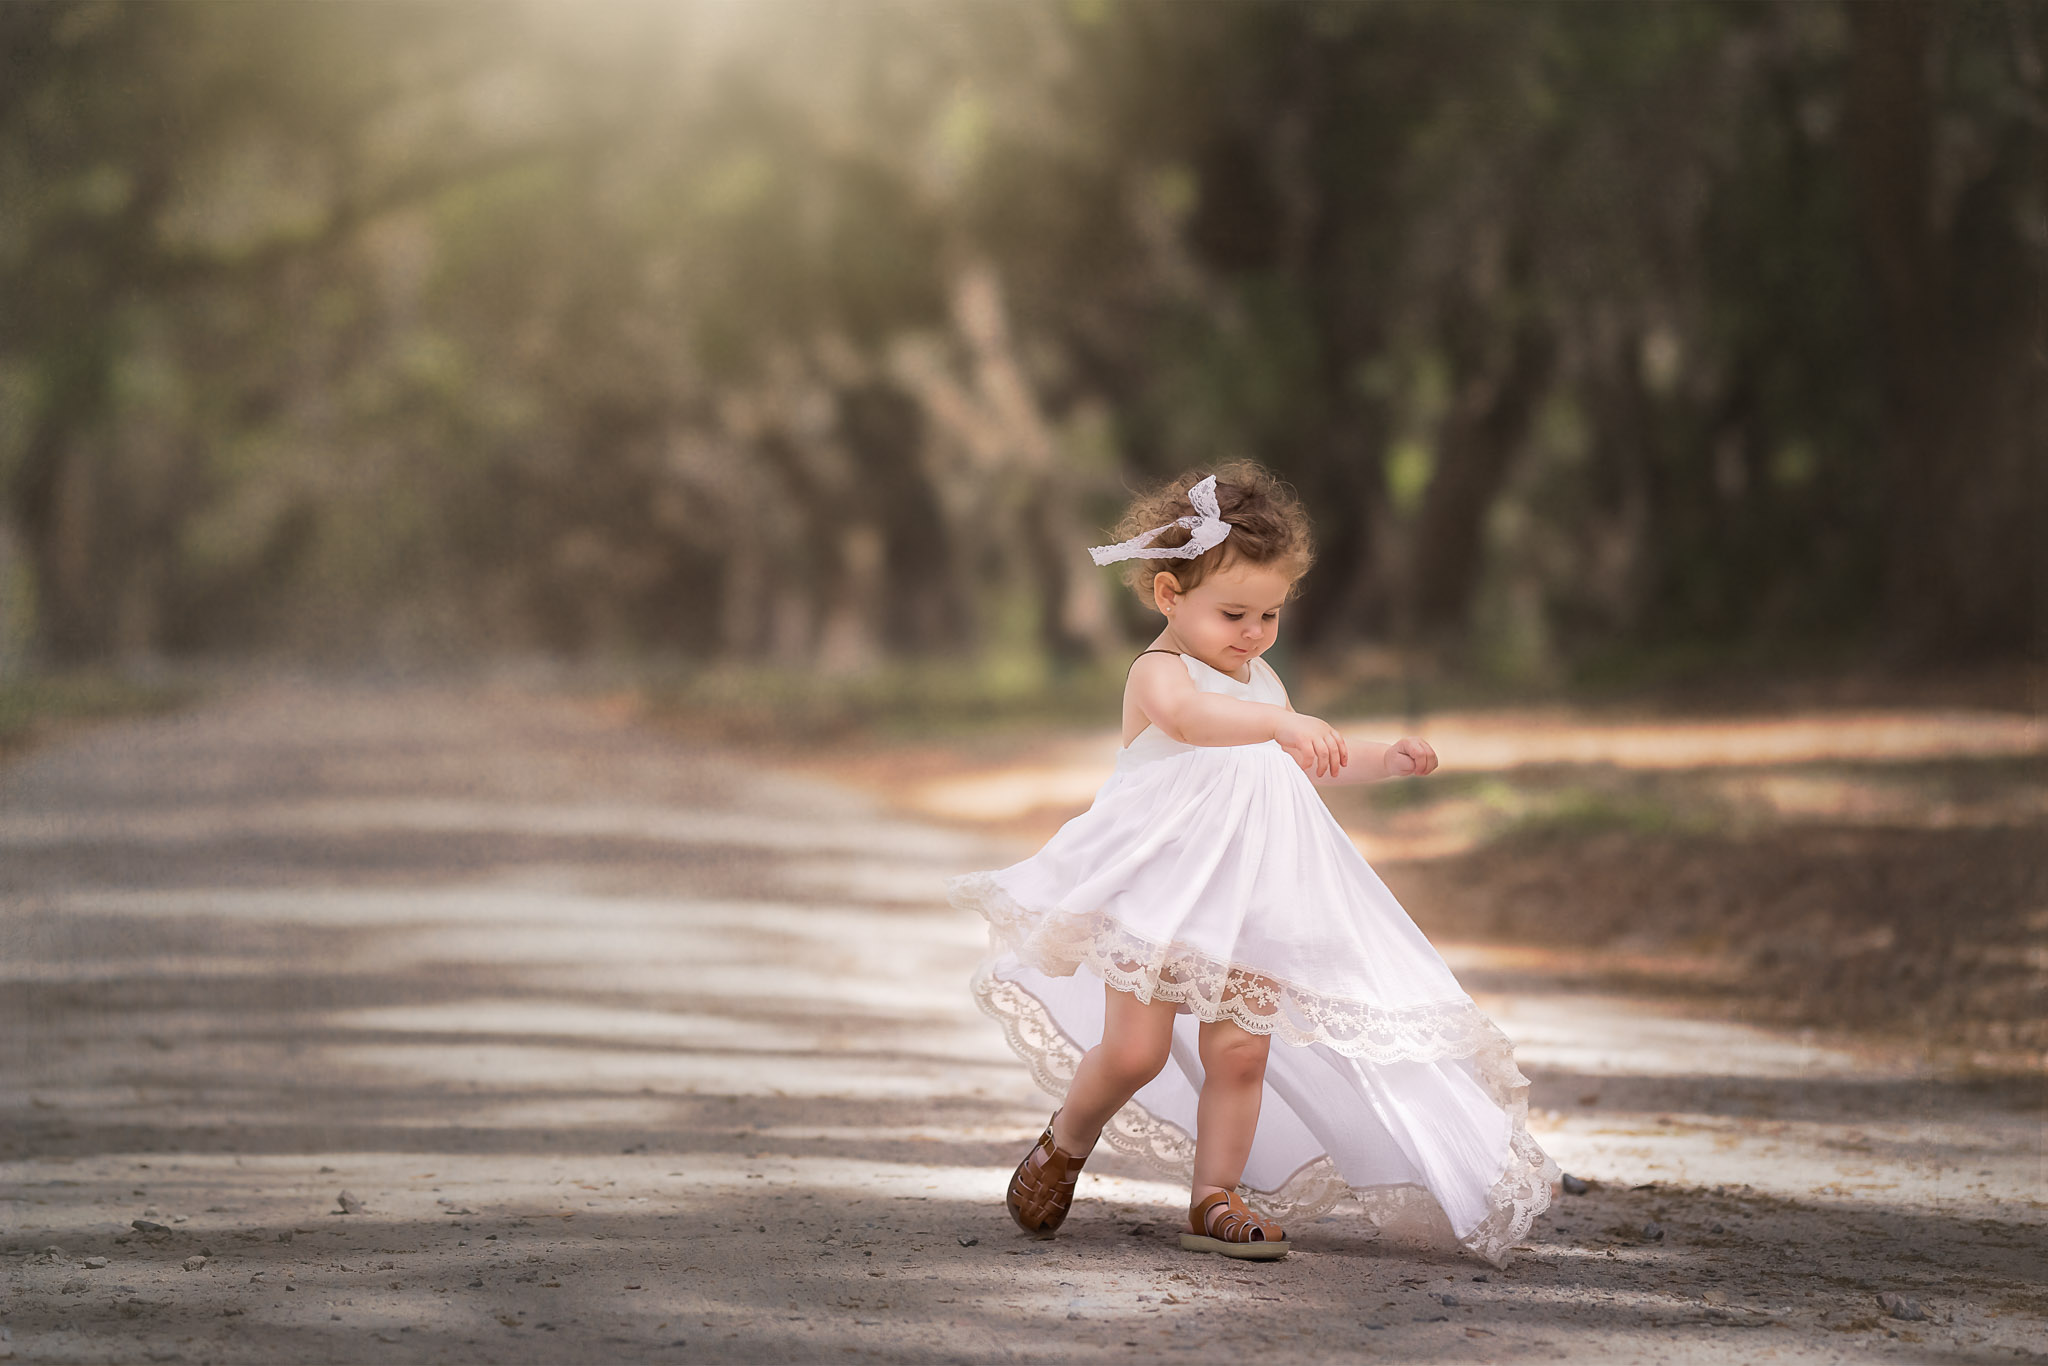 A little girl twirling in a pretty white dress in anticipation of the best Raleigh preschools